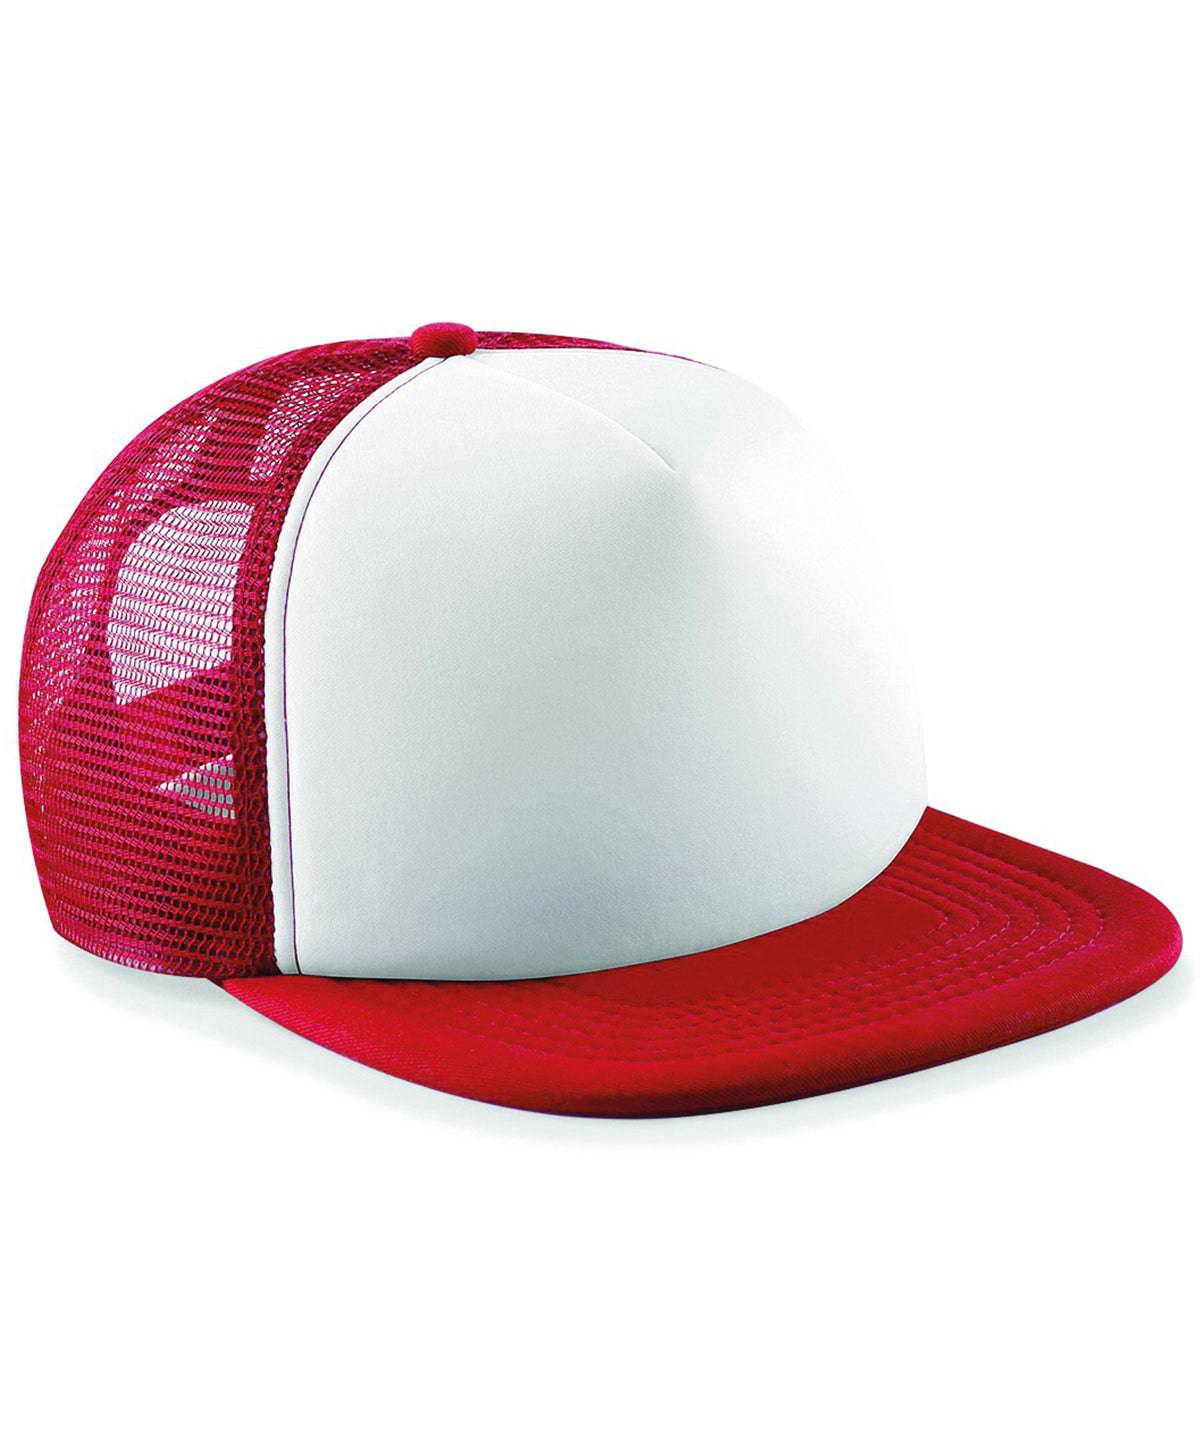 Classic Red/White - Vintage snapback trucker